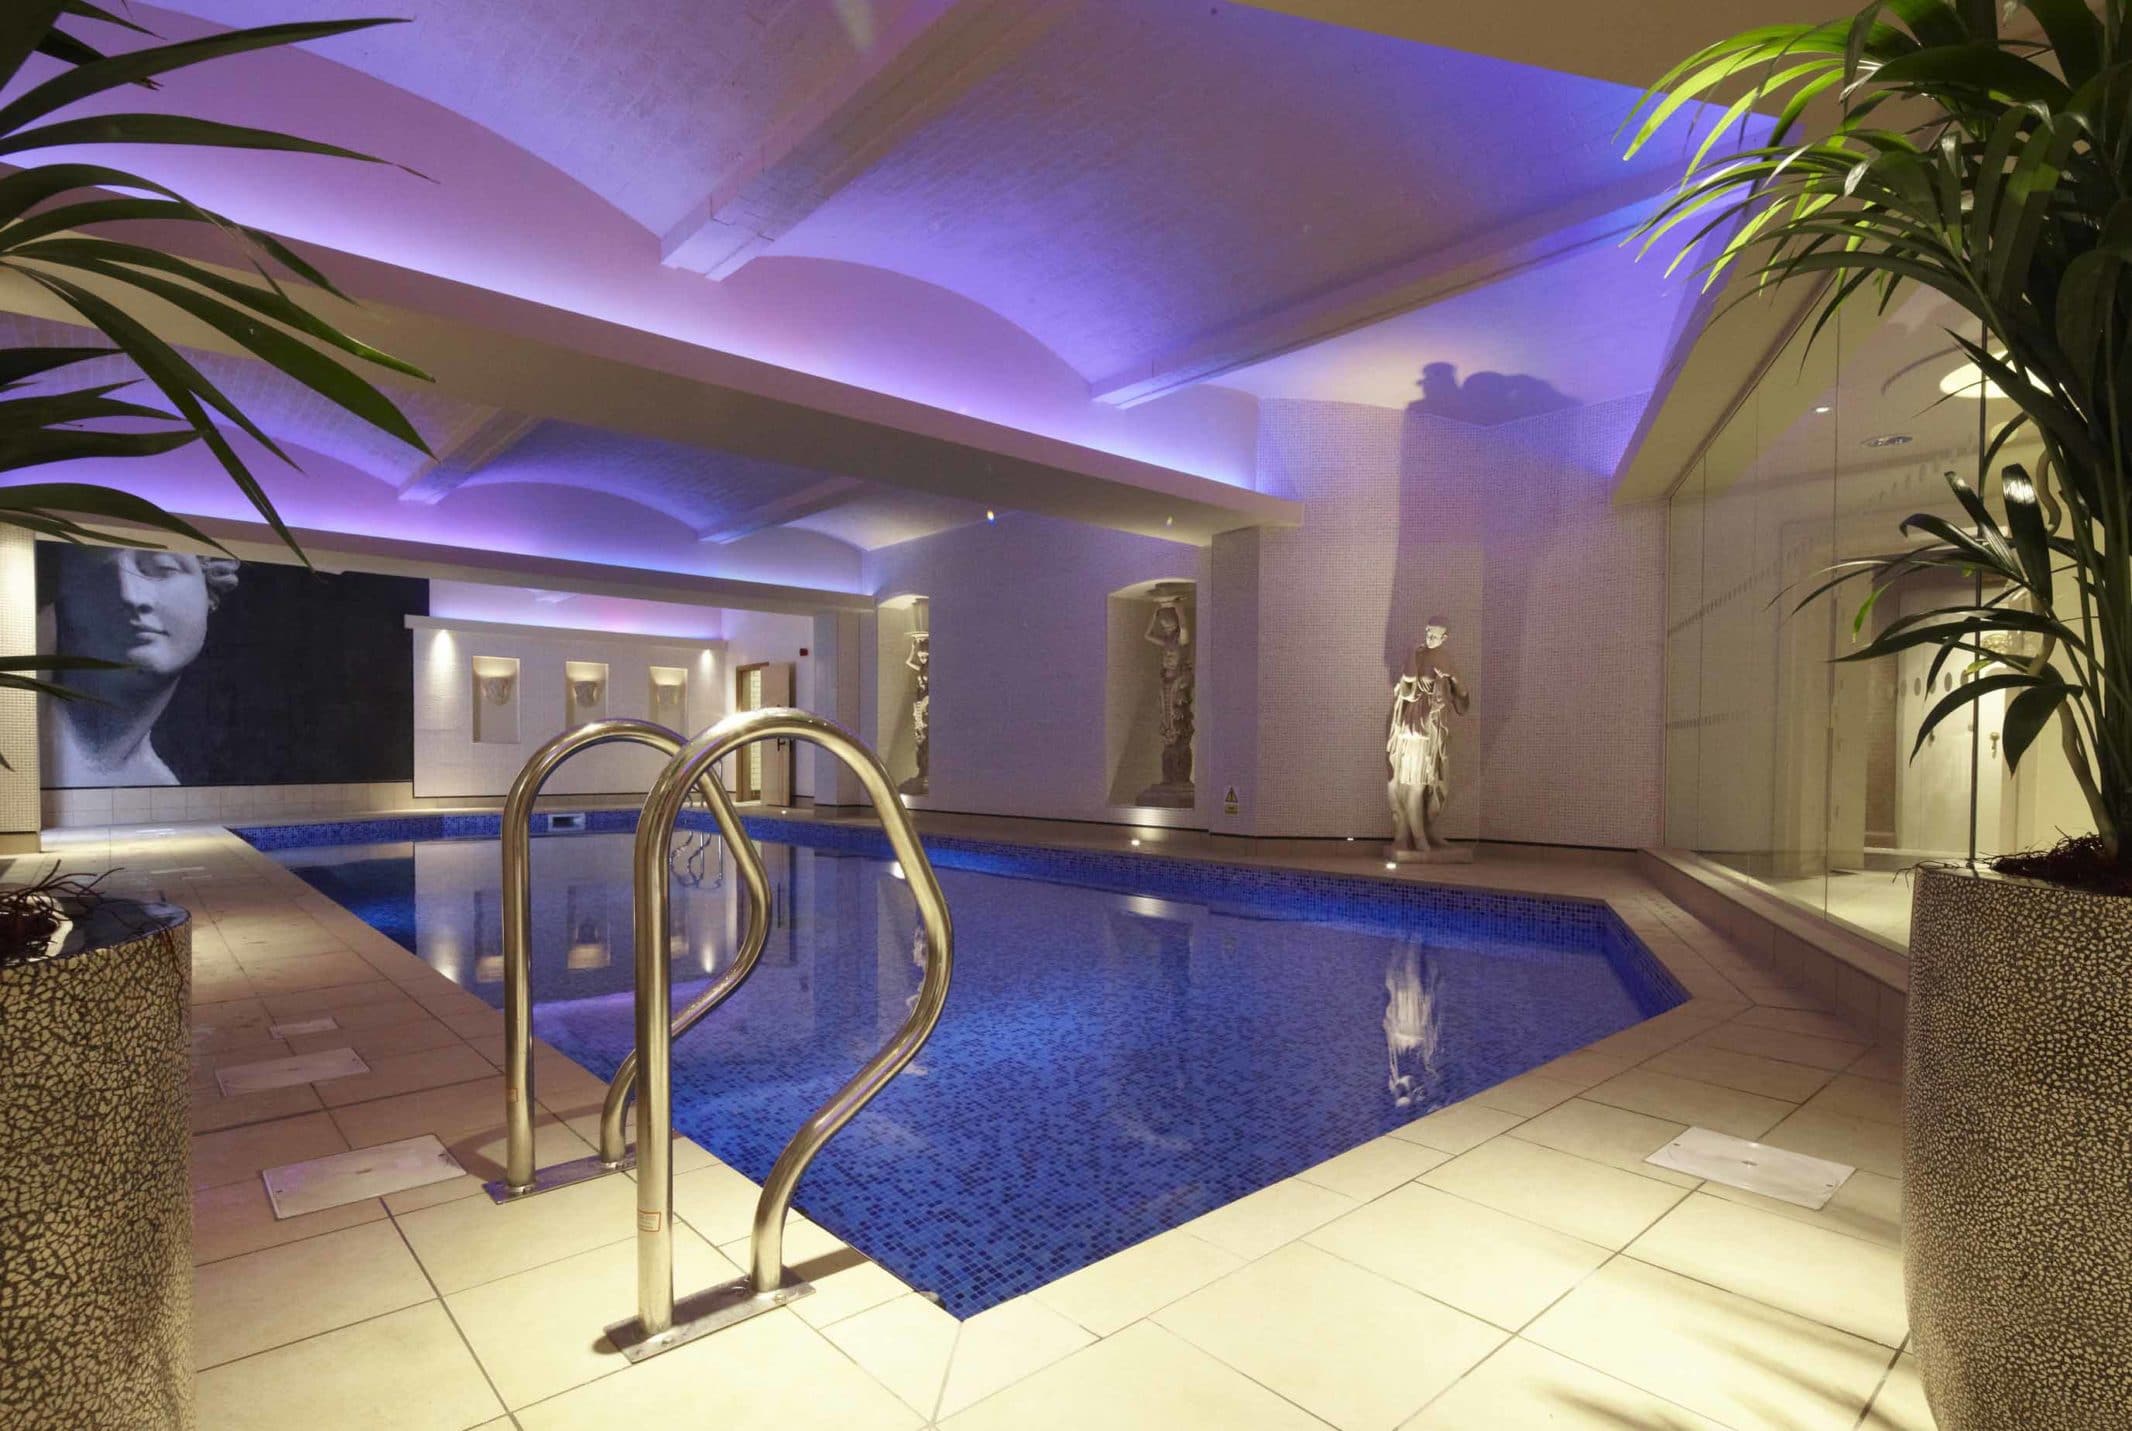 The underground swimming pool at The Grand Hotel and Spa, York